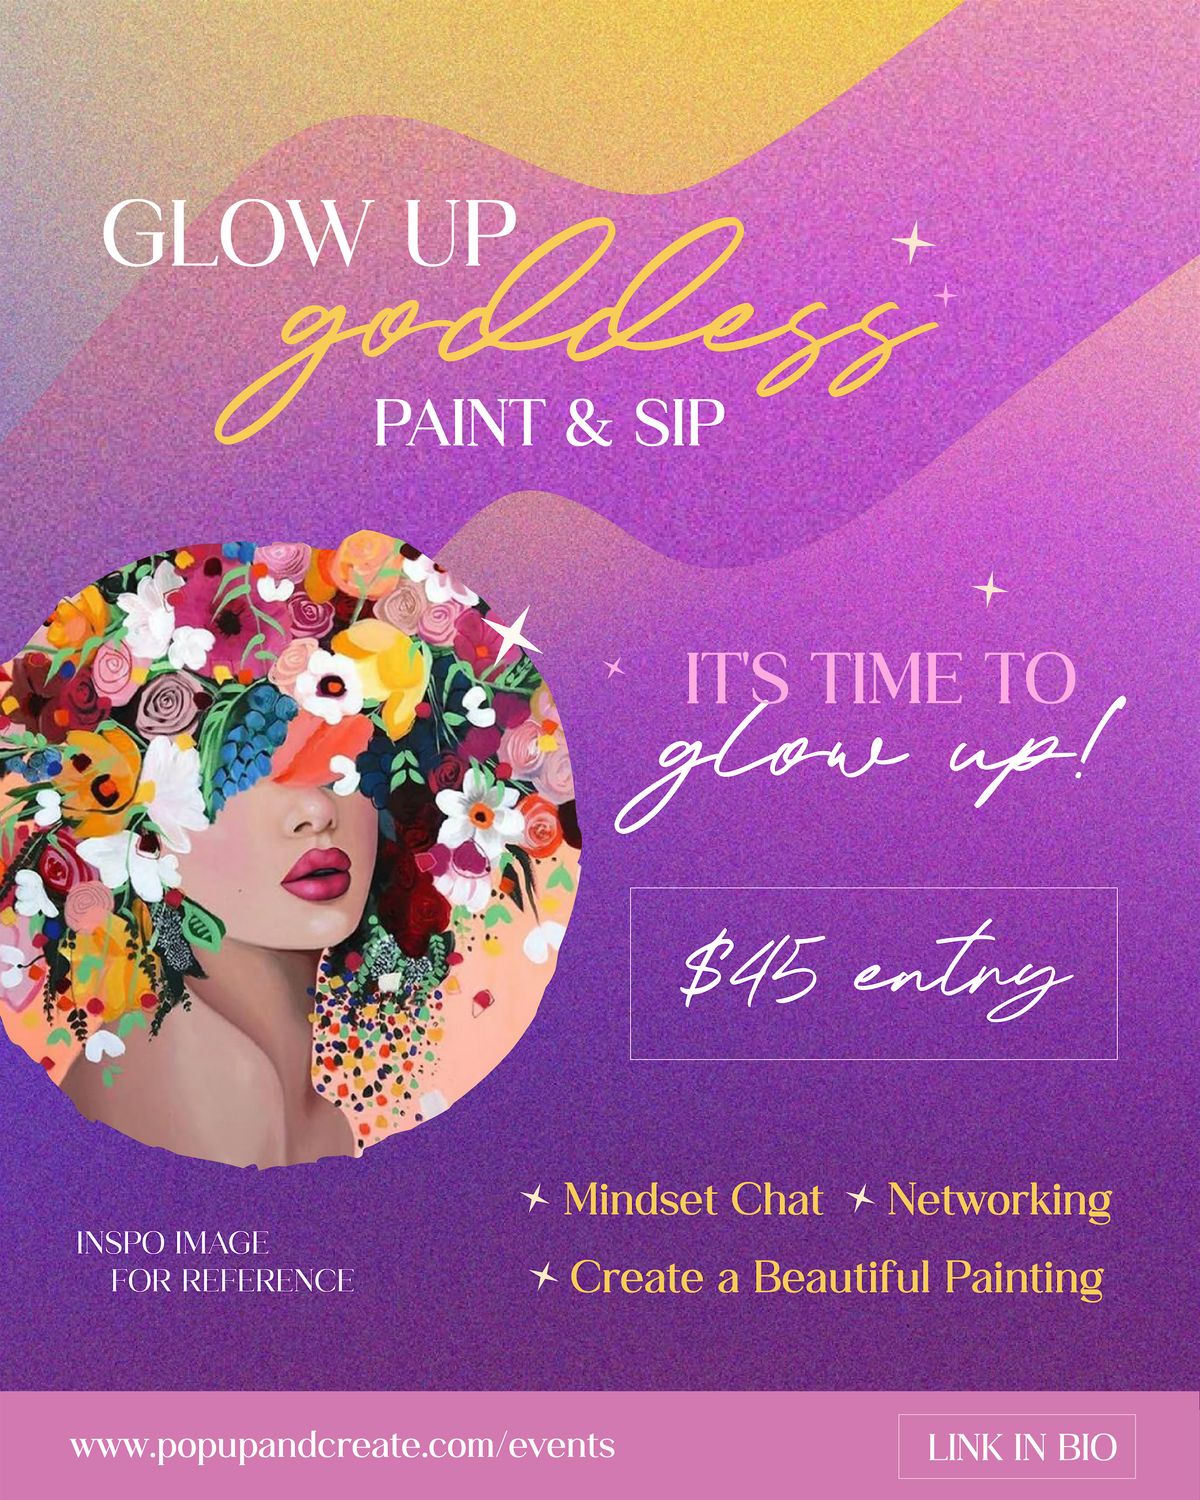 Glow Up Goddess Paint and Sip at Pop Up And Create